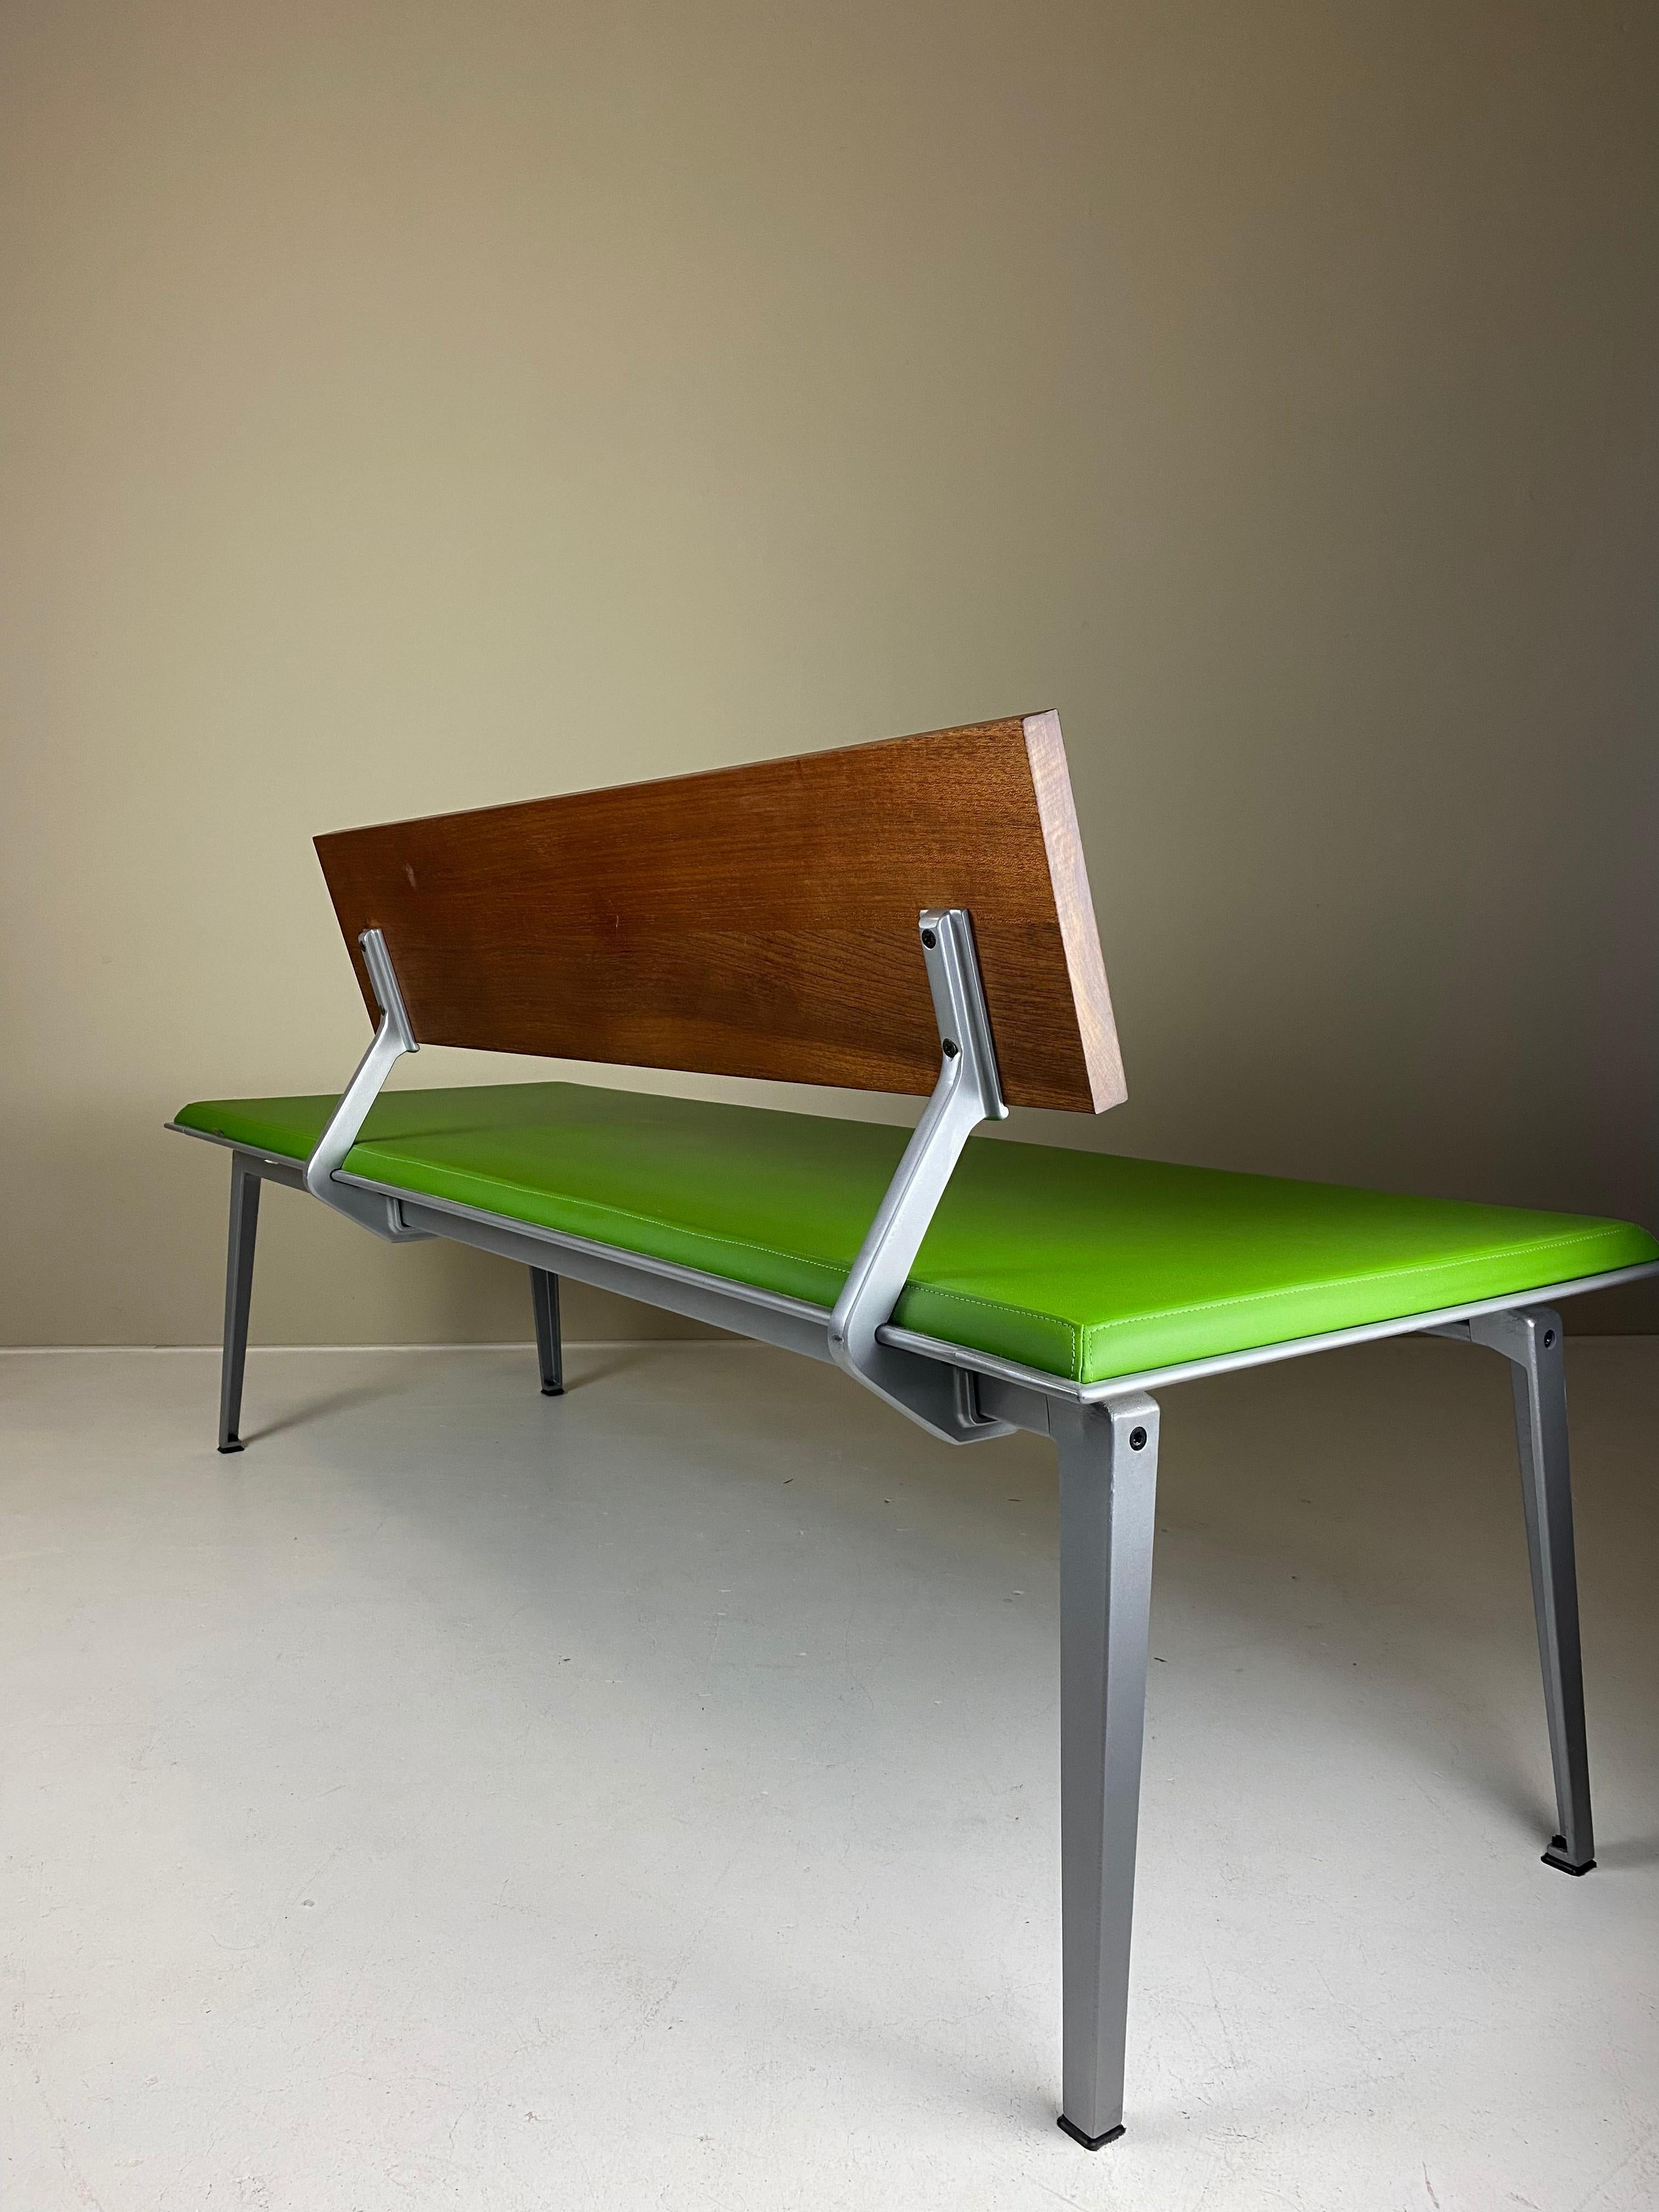 Born in 1950 and educated at the Rietveld Academy in Amsterdam, Bas Pruyser designed school furniture and ranges of tables and chairs for Dutch manufacturer Ahrend. Funnily, Pruyser drew his biggest succes from his designs for the waste management